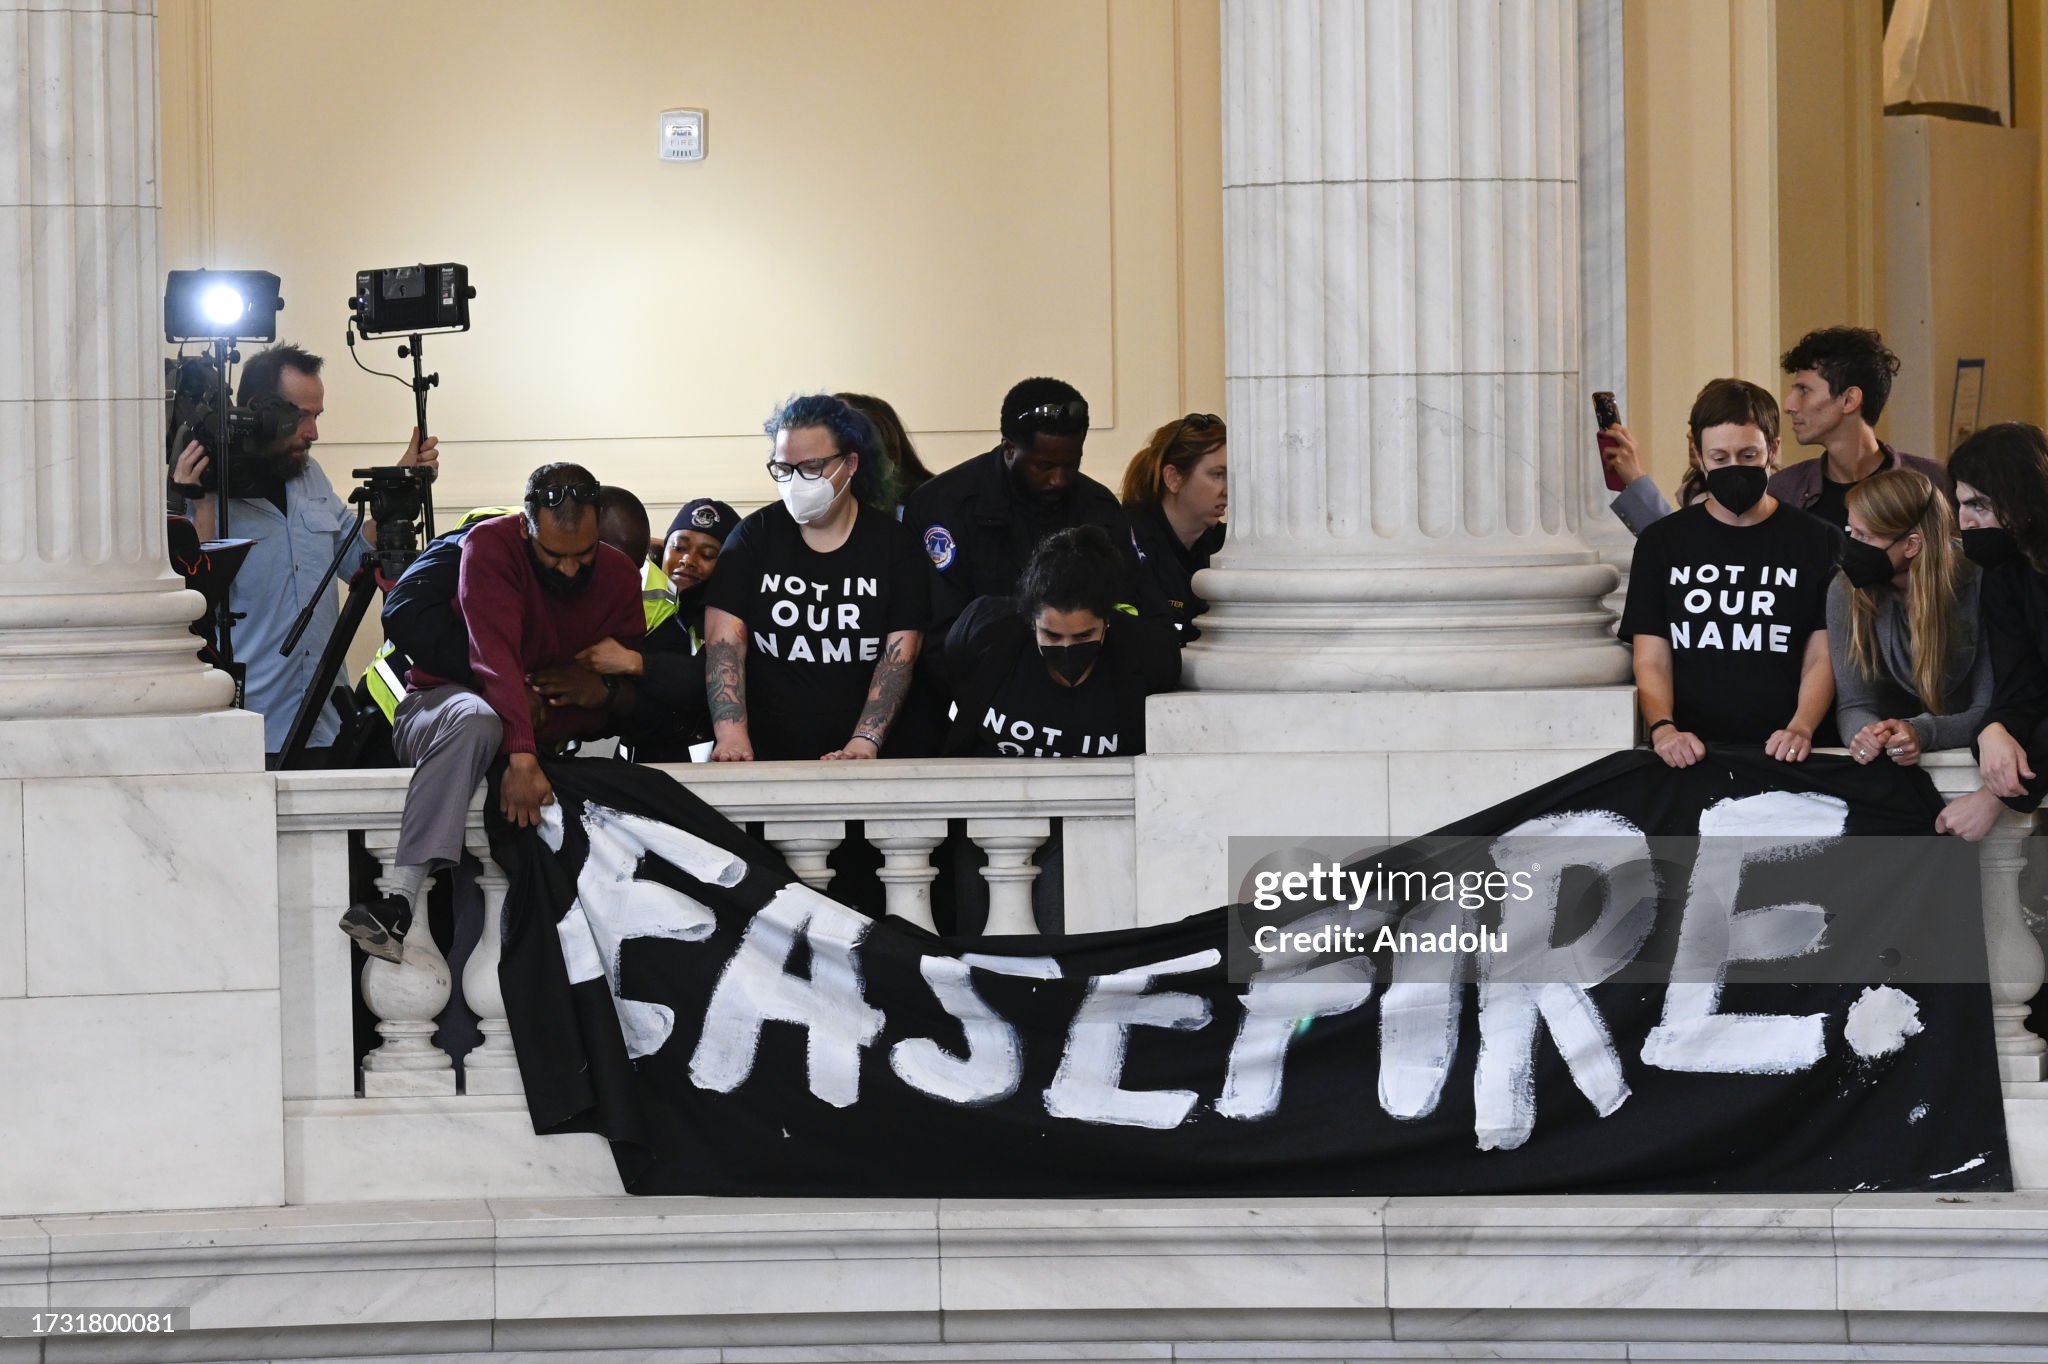 jewish-groups-face-arrests-at-us-congress-building-as-they-hold-pro-palestinian-protest.jpg